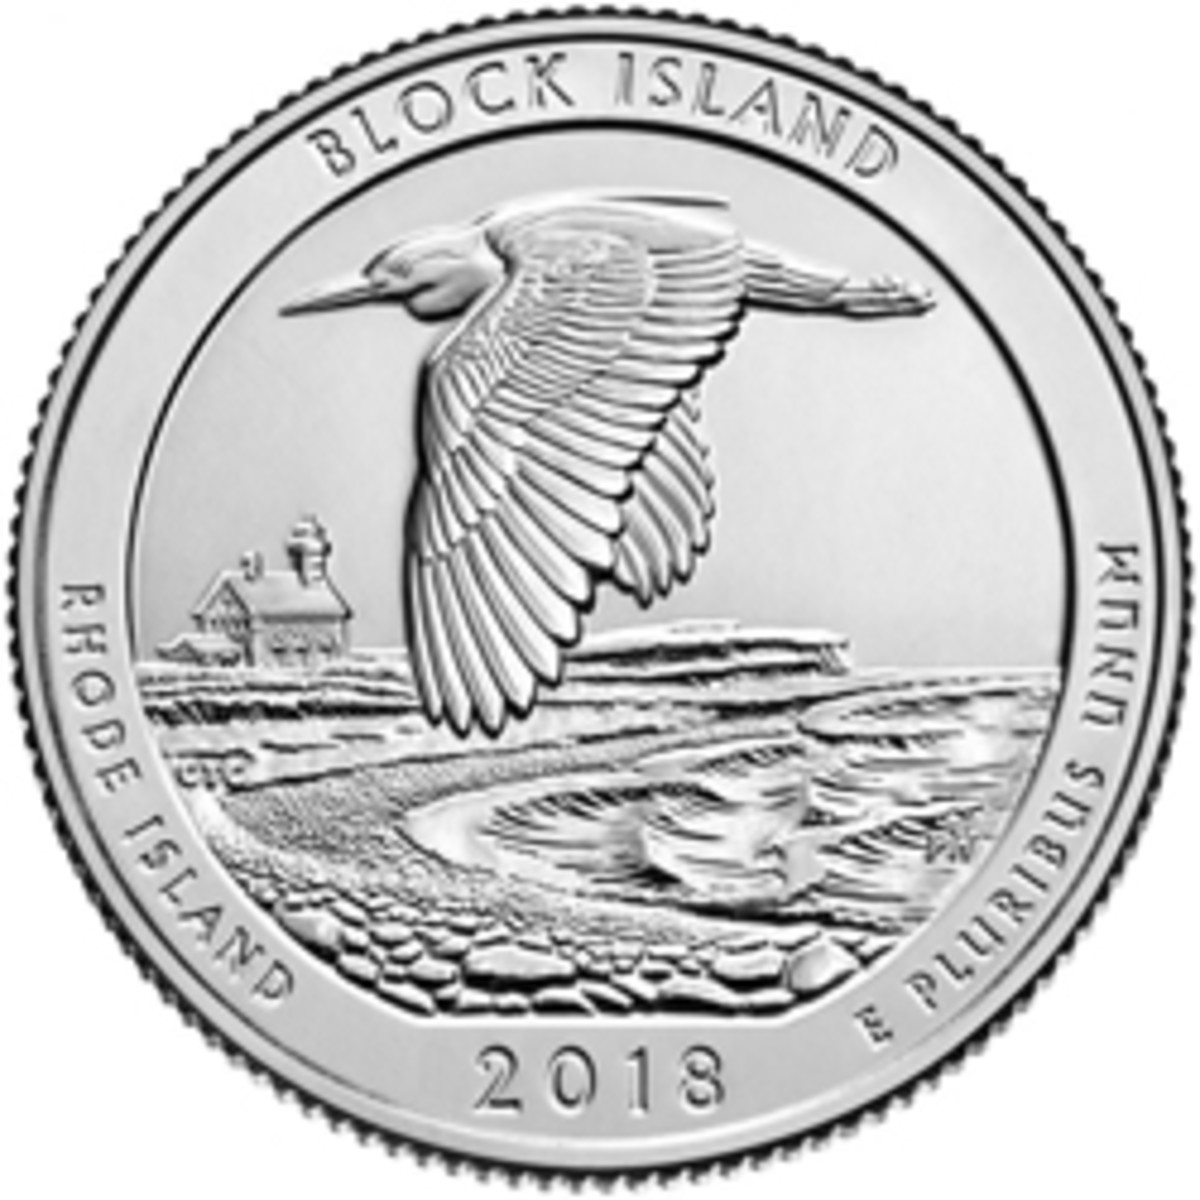  The Block Island quarter is the most recently released design in the America the Beautiful series. It is the fifth and final design of 2018. There will be five ATB designs in 2019, five in 2020, and one in 2021 that will conclude the series.